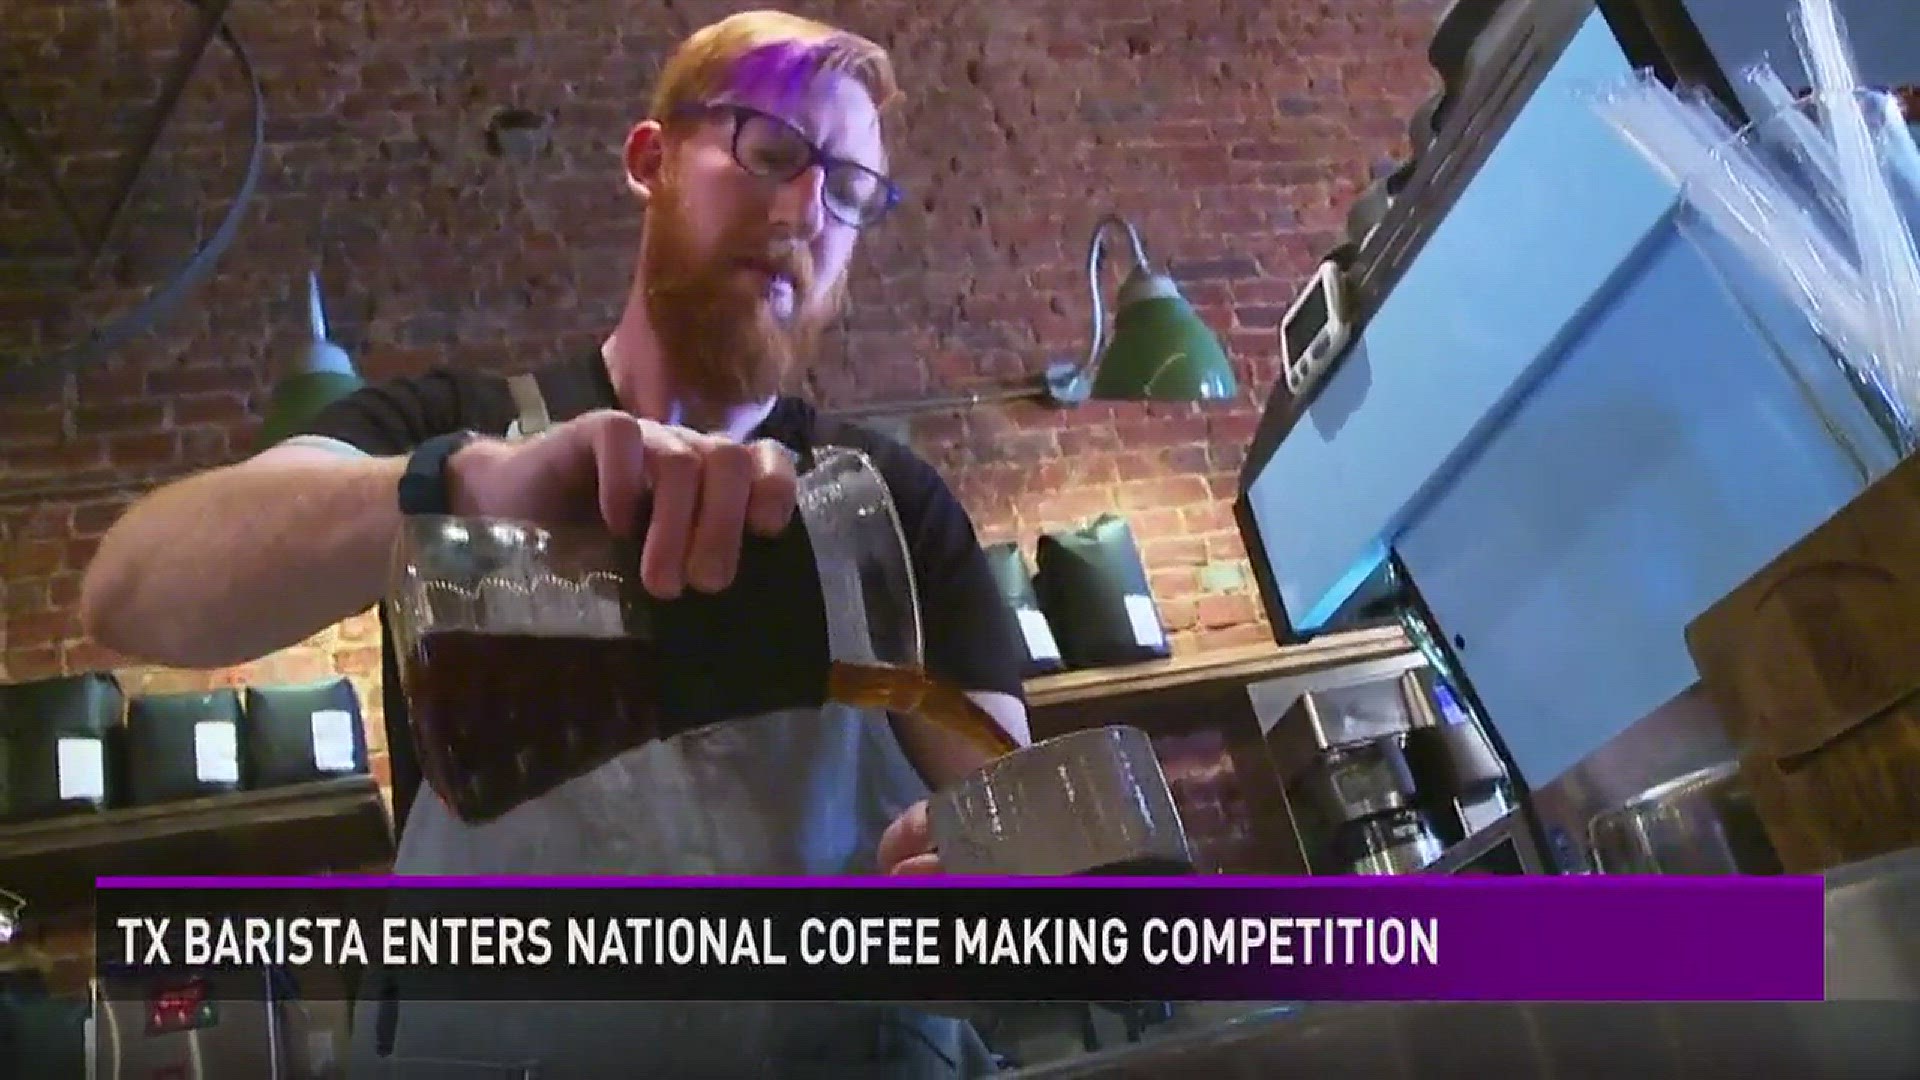 North Texas Barista heads to a national coffee making competition